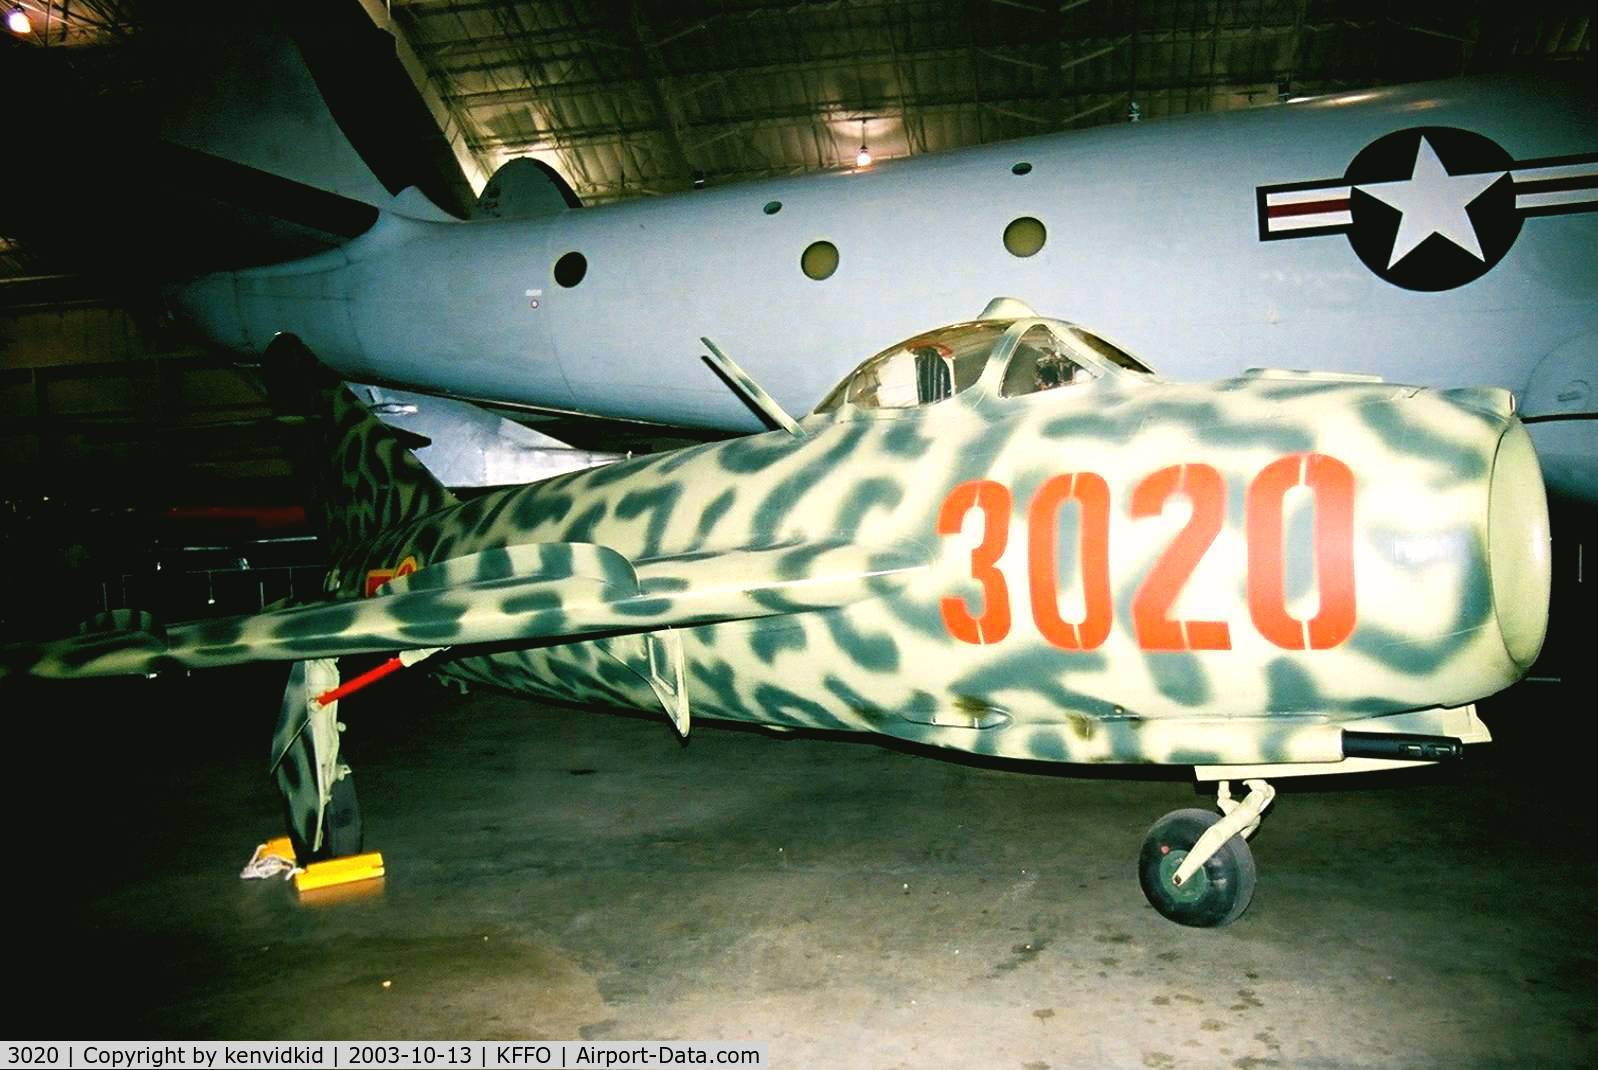 3020, Mikoyan-Gurevich MiG-17C C/N 799, At the Museum of the United States Air Force Dayton Ohio.